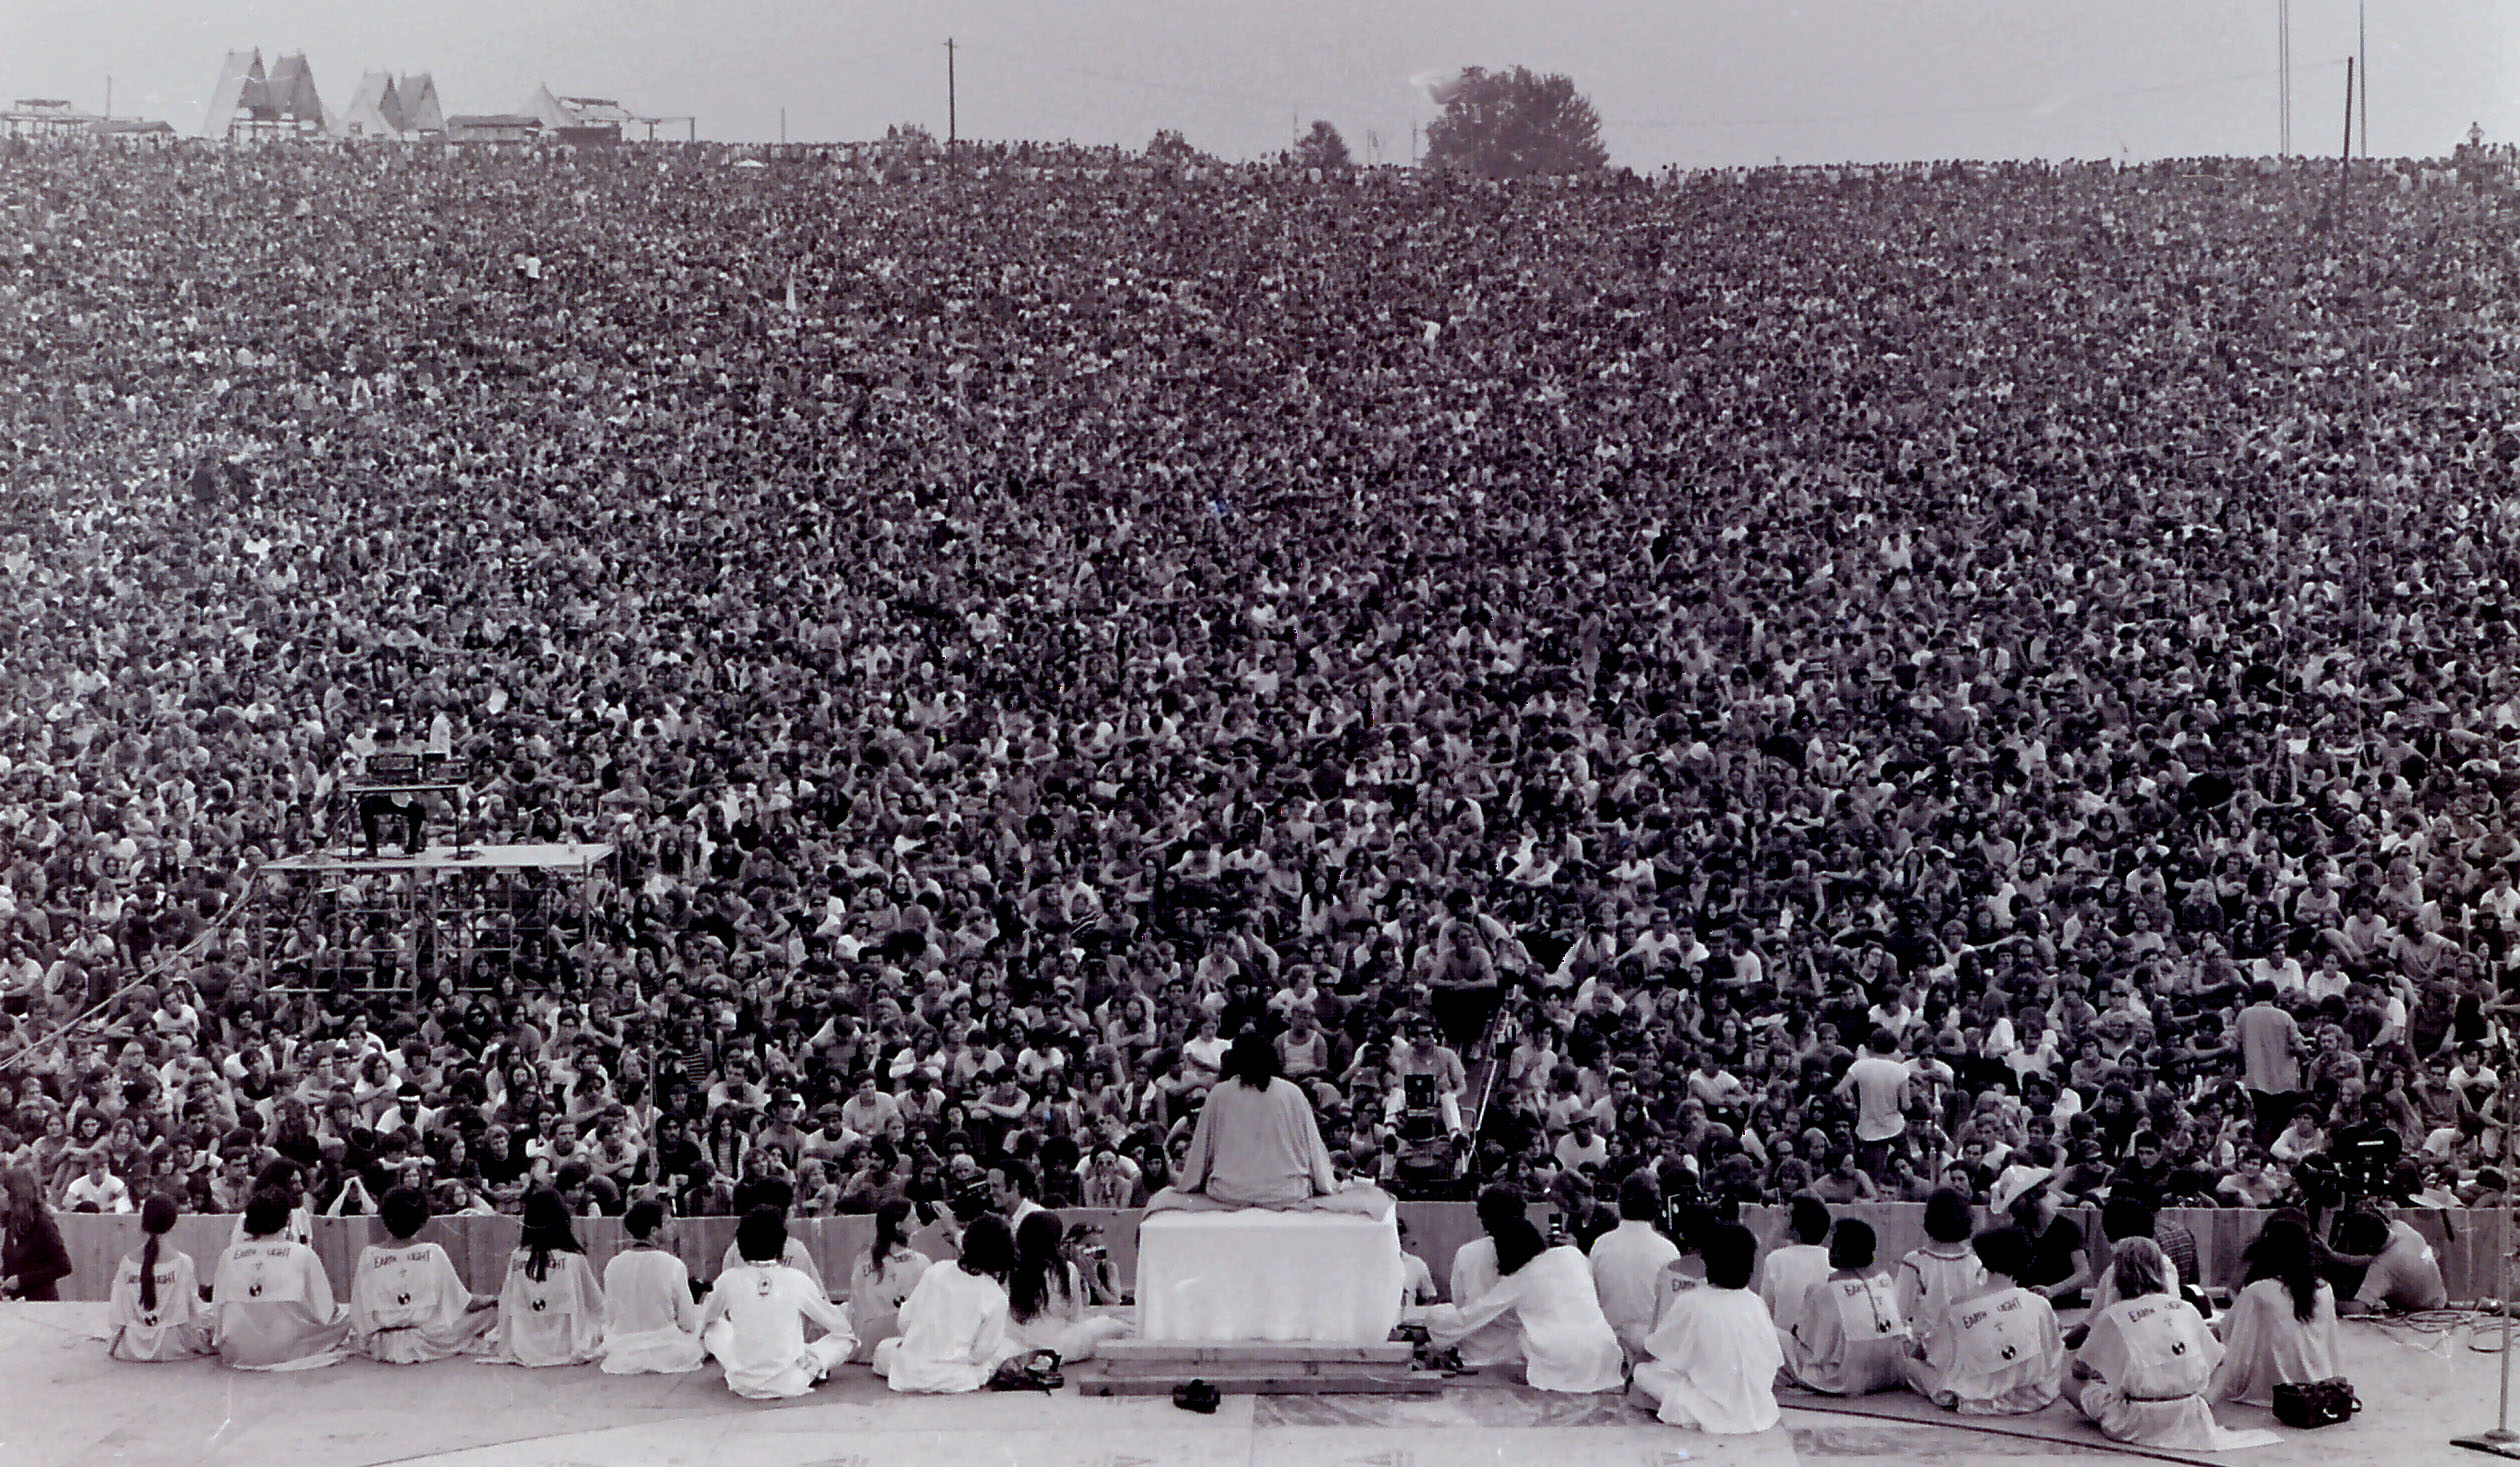 The Story Behind 1969’s Woodstock Music Festival | A New York Minute In History